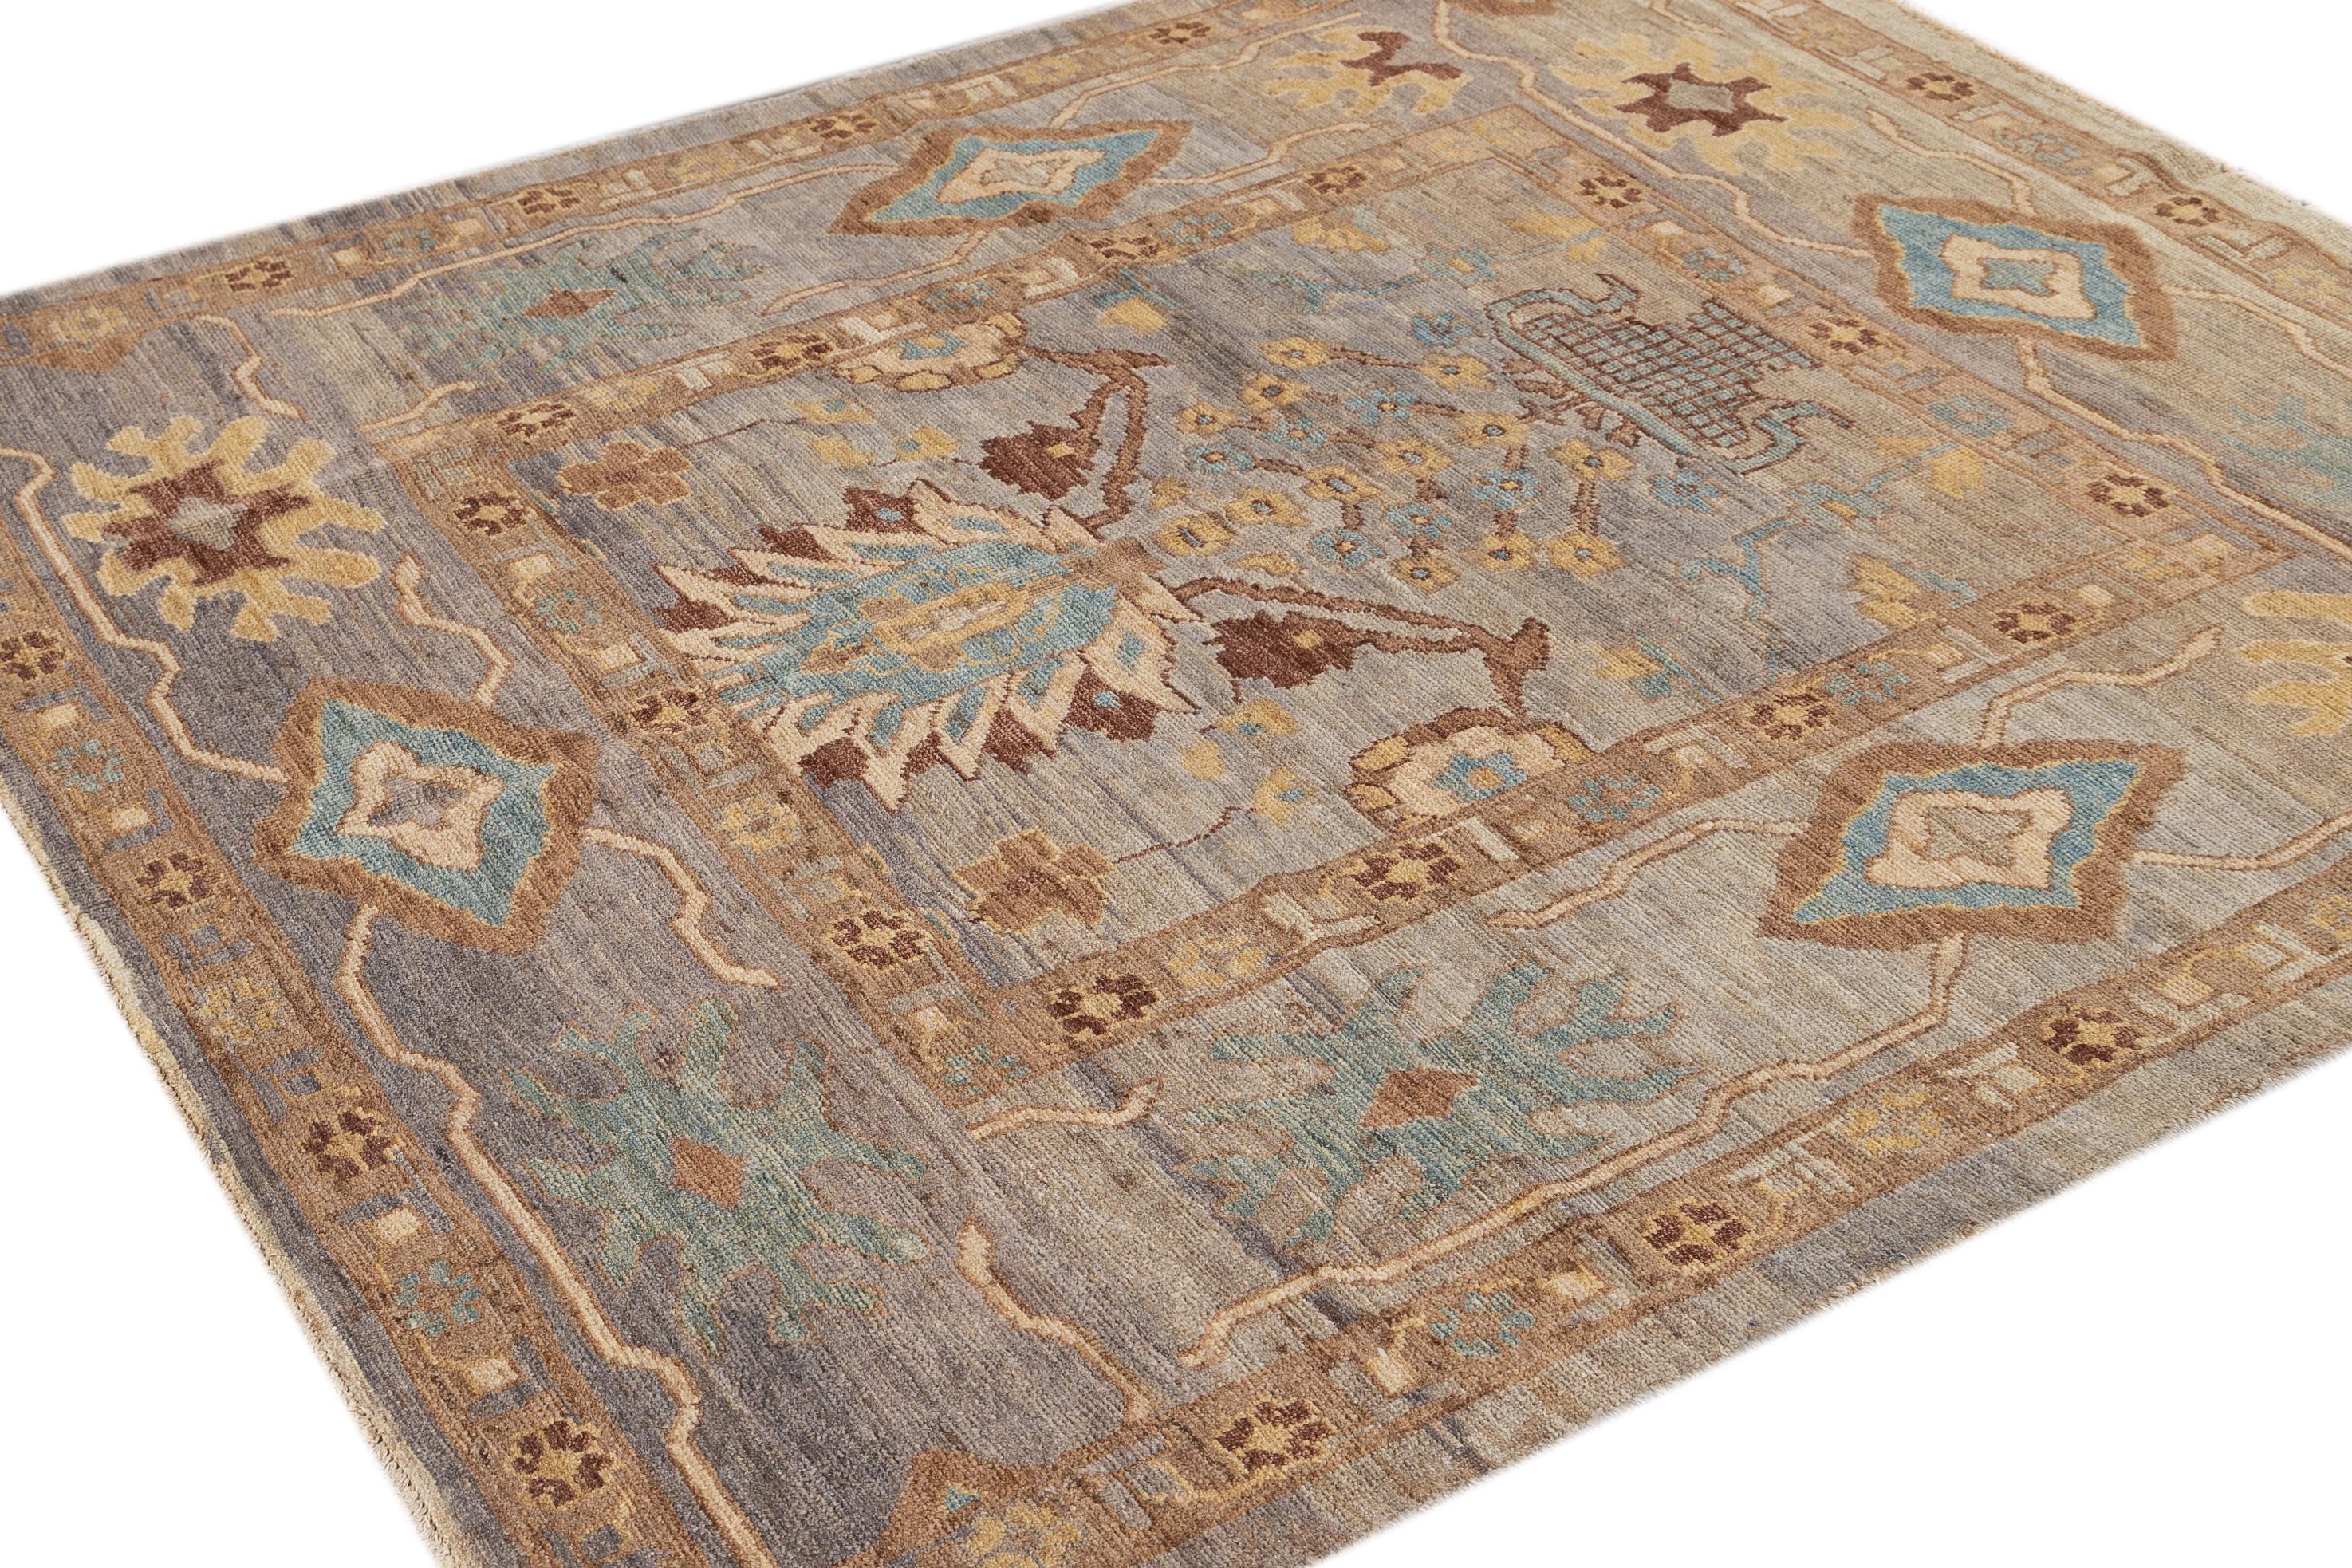 Beautiful modern 21st century Persian Sultanabad rug, hand knotted wool with a light gray field, tan, brown and blue accents in an all-over floral design.

This rug measures: 6' x 6'9